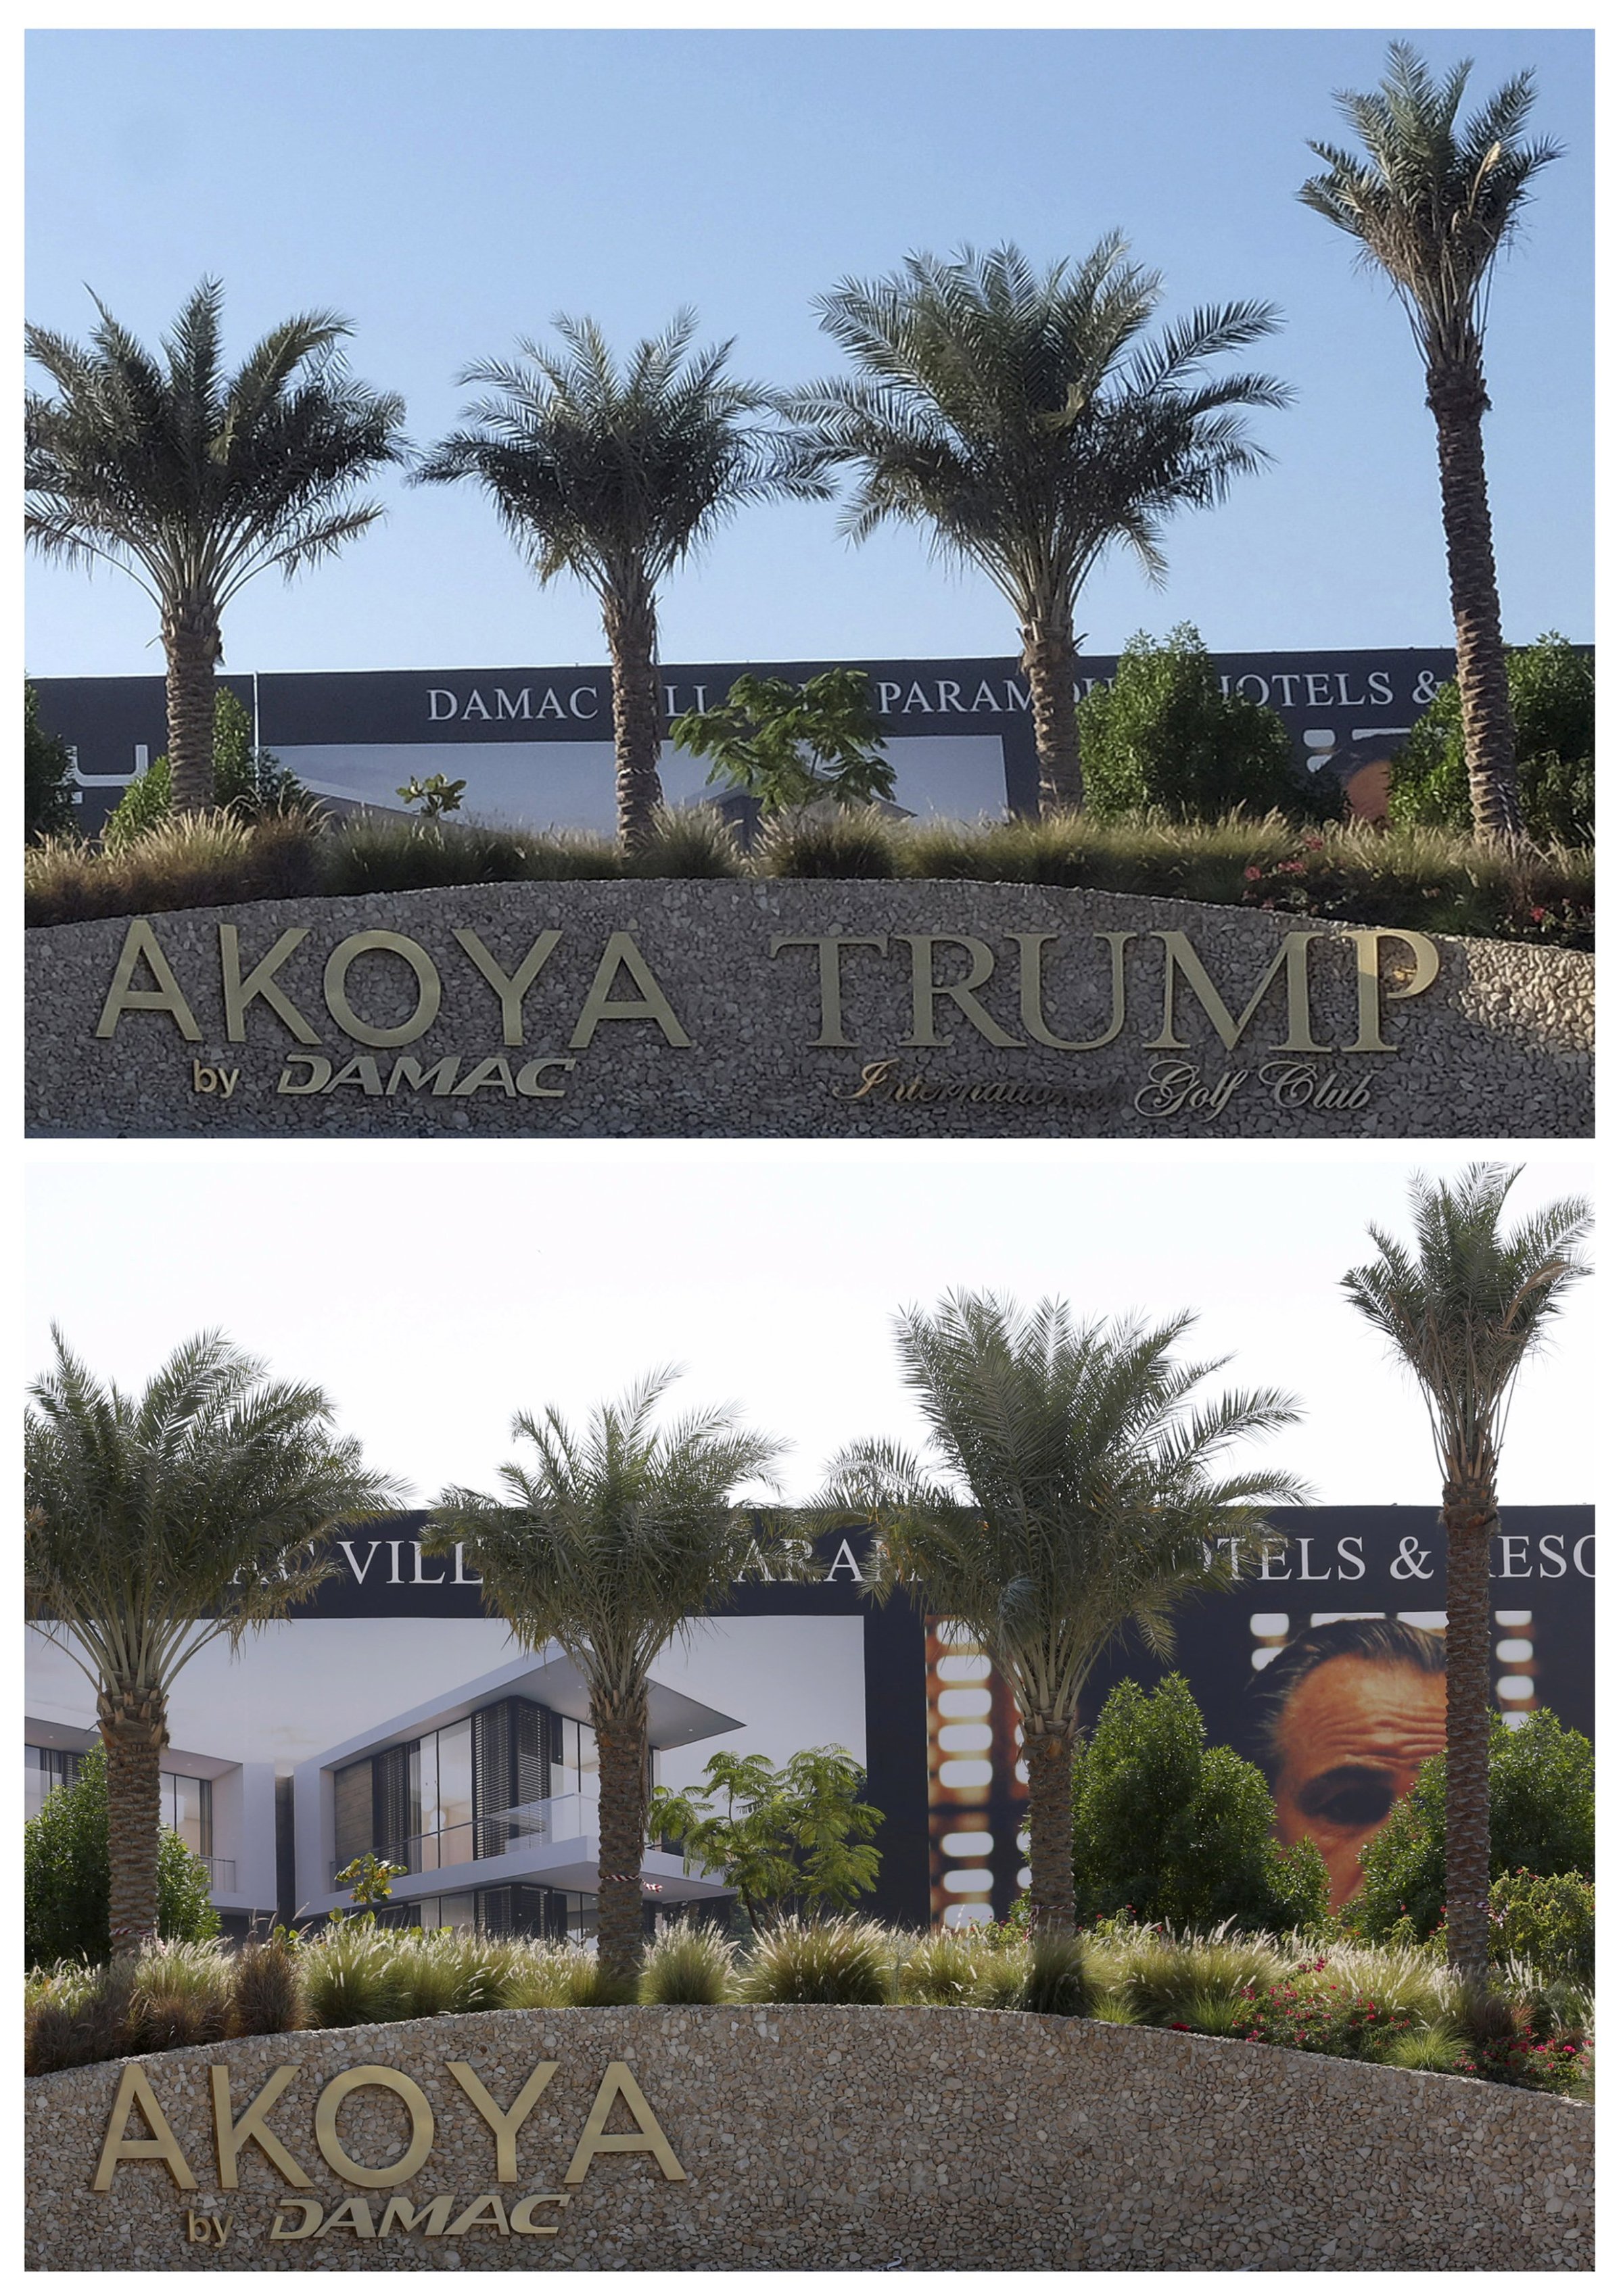 A combination picture shows the signboard before and after the removal of the Trump International Golf Club portion at the AKOYA by DAMAC development in Dubai